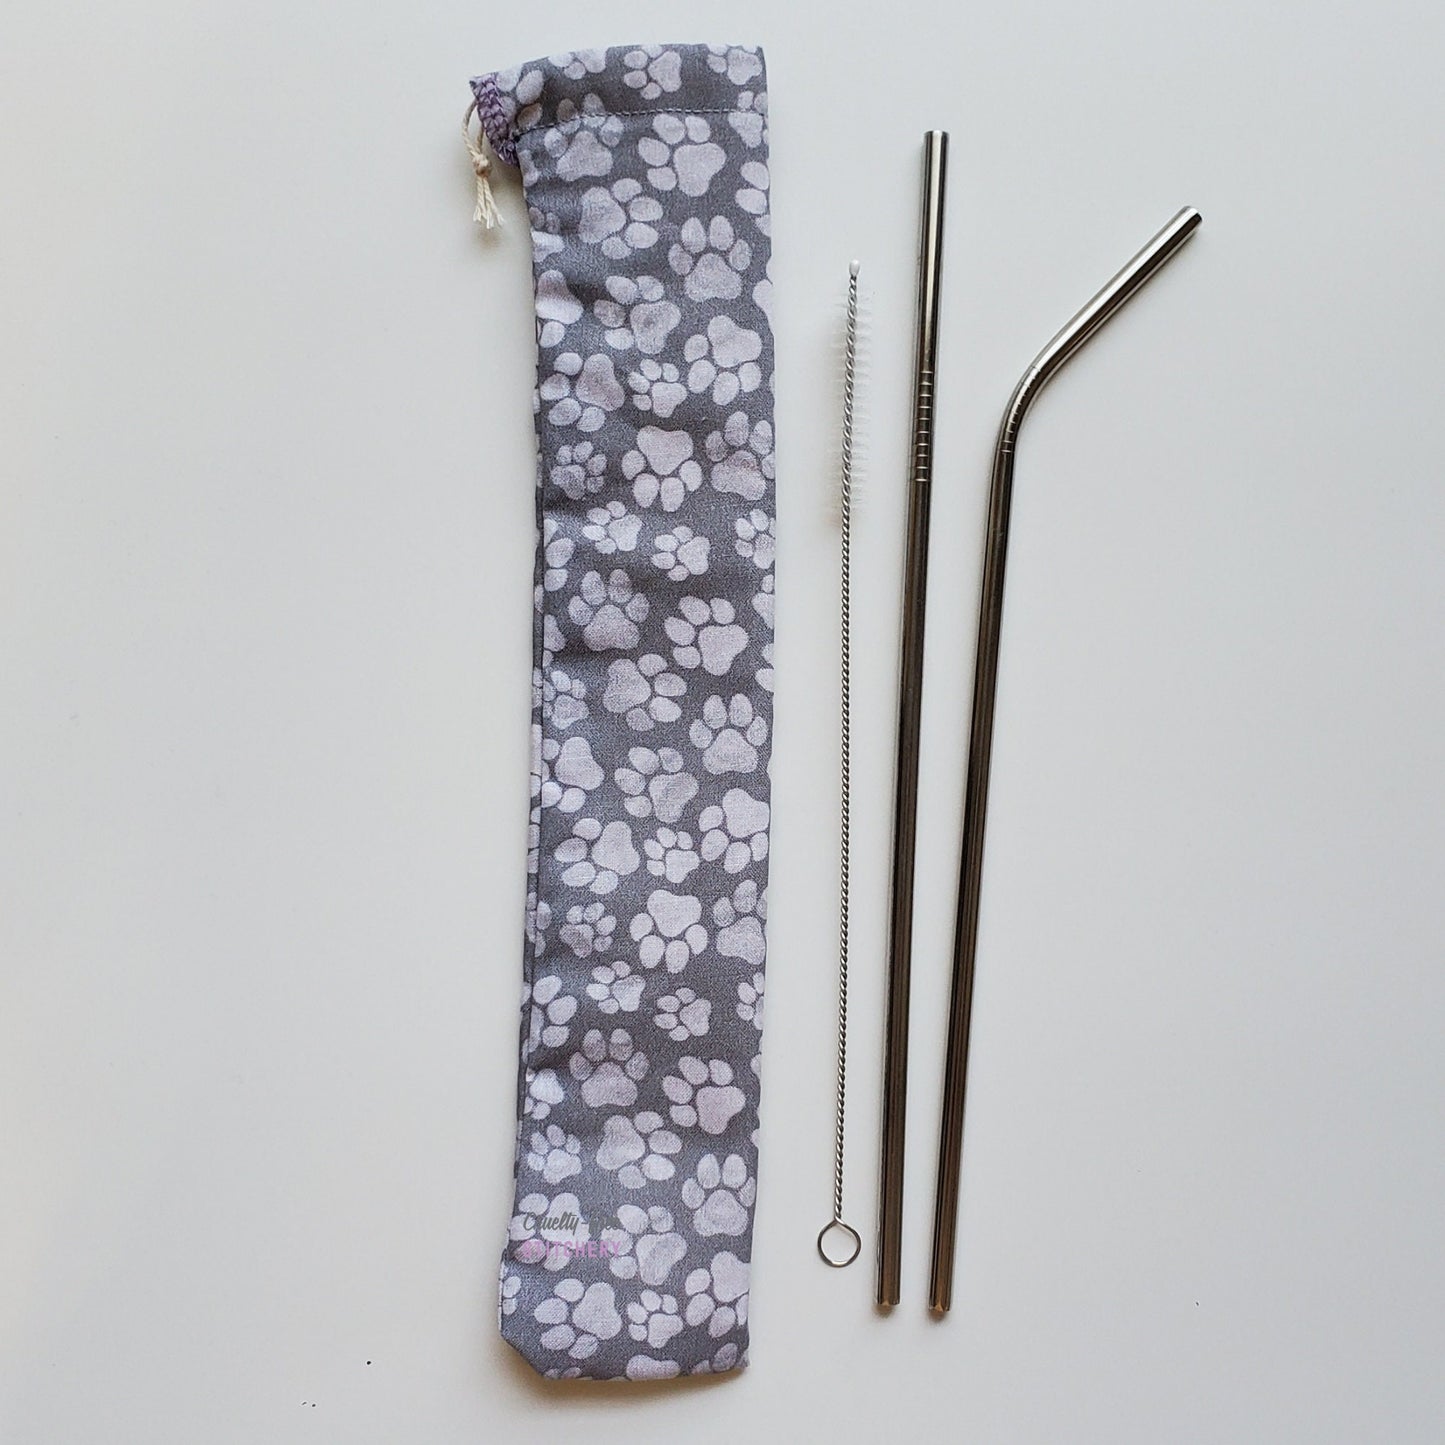 Reusable straw pouch in the same paw print laying vertically next to a straw cleaner brush, a straight stainless steel straw, and a bent stainless steel straw.